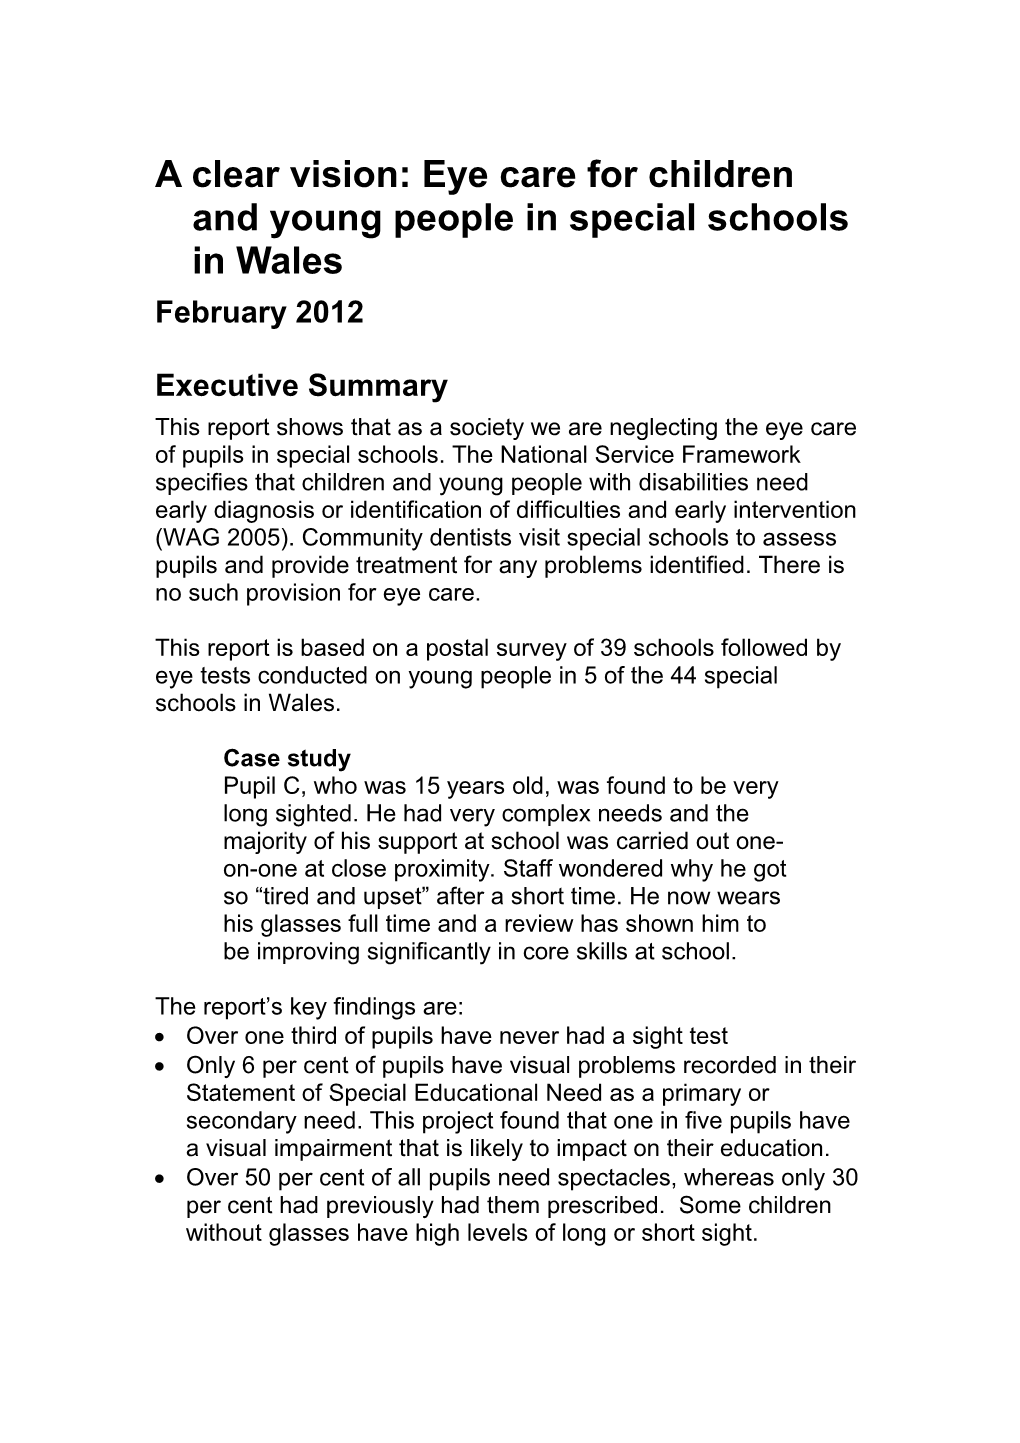 A Clear Vision: Eye Care for Children and Young People in Special Schools in Wales